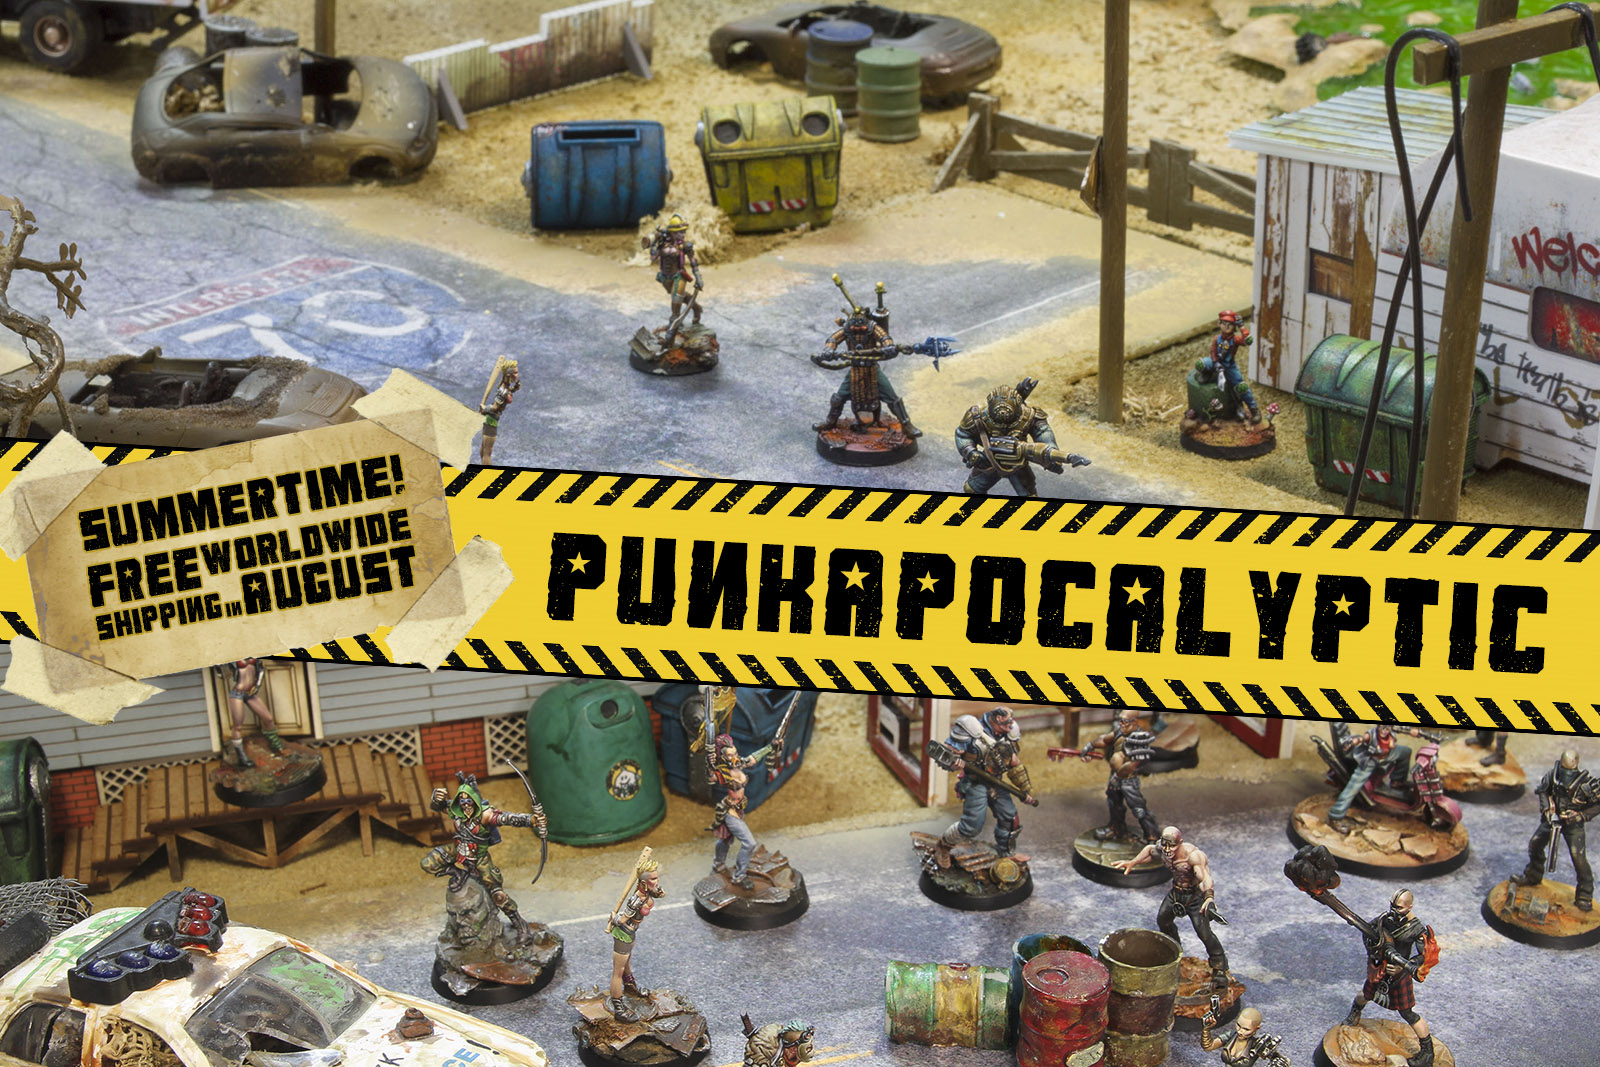 Punkapocalyptic. Free shipping worldwide for all of August